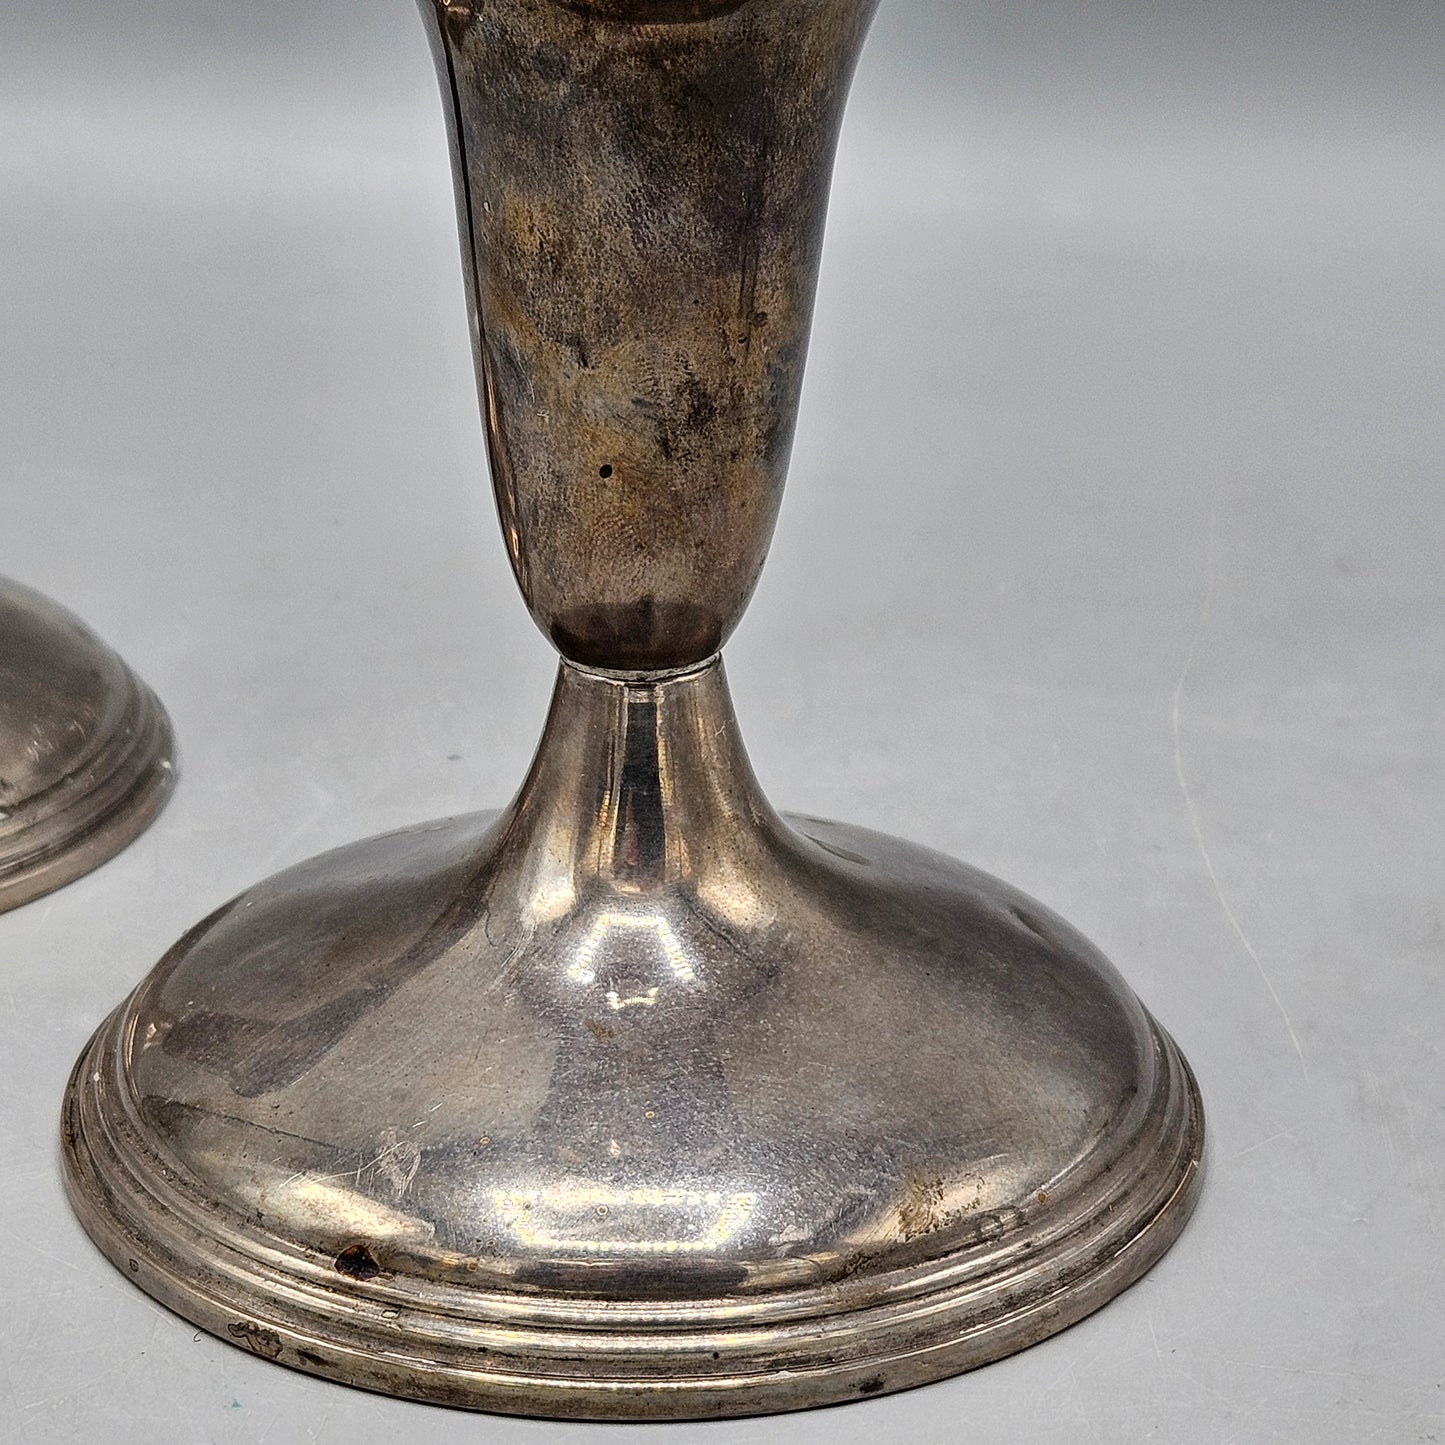 Pair of Vintage Empire Sterling Silver Weighted Candlesticks